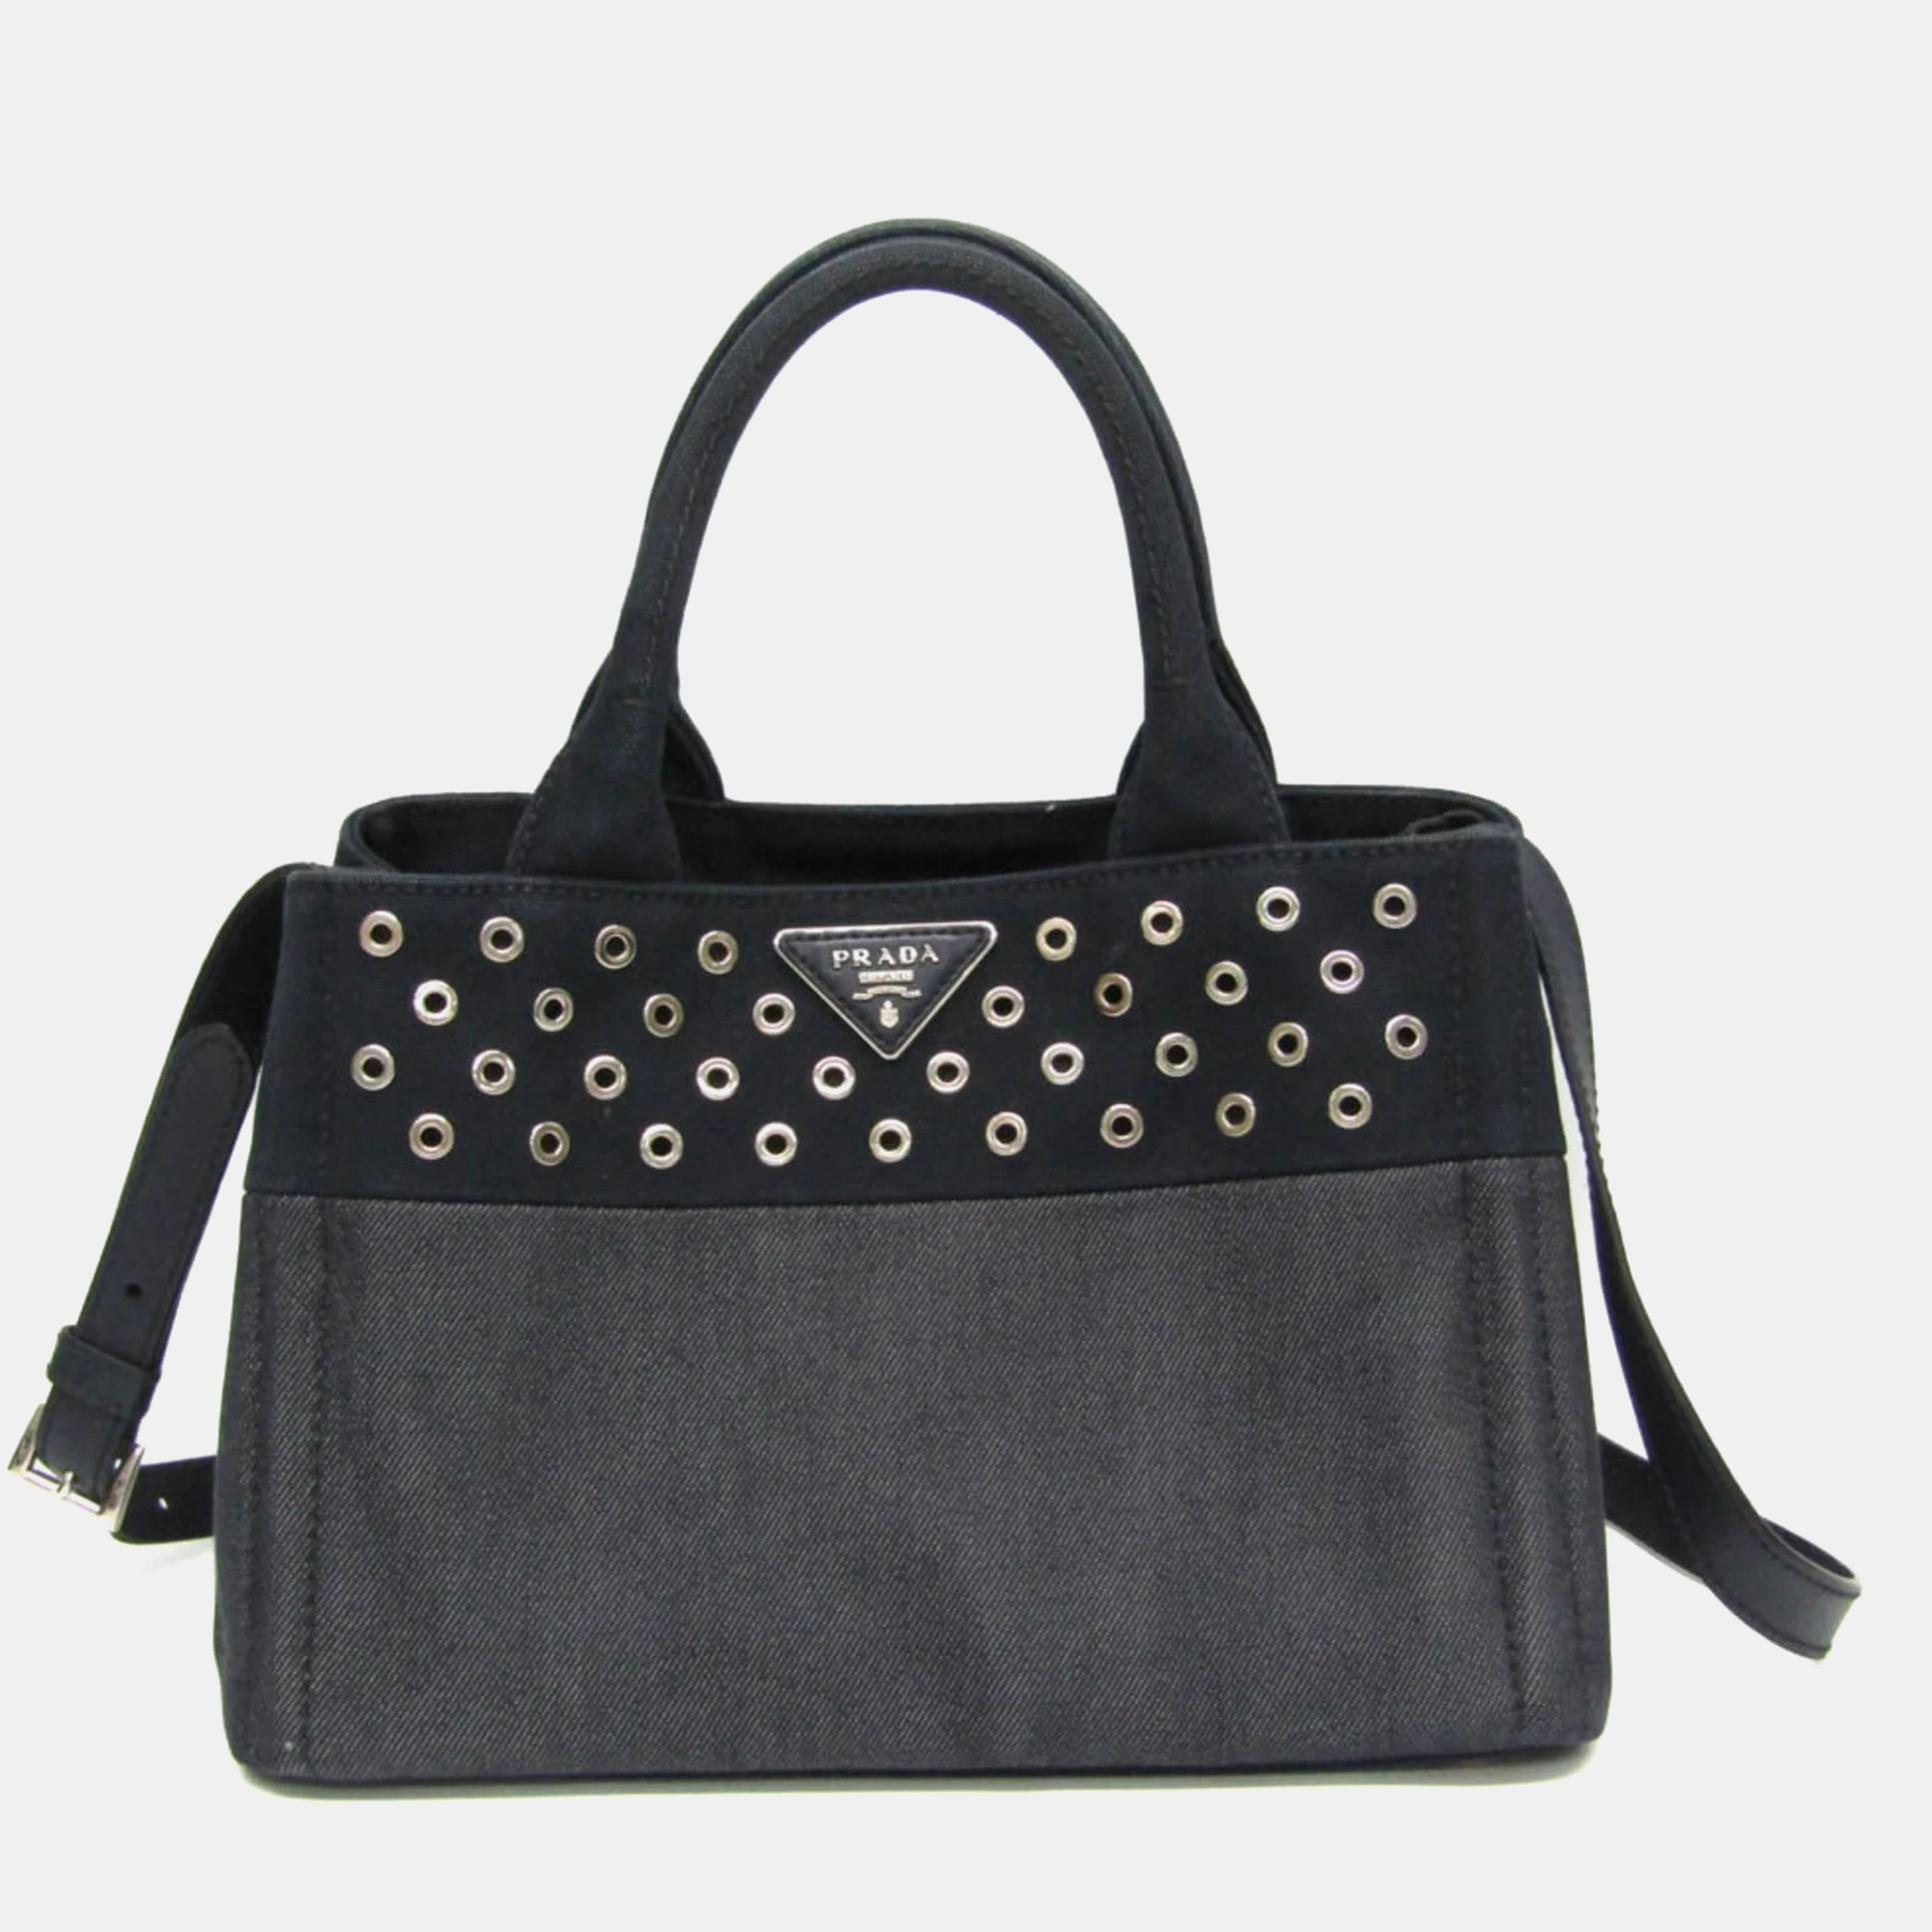 Prada navy blue denim and leather studded canapa tote bag